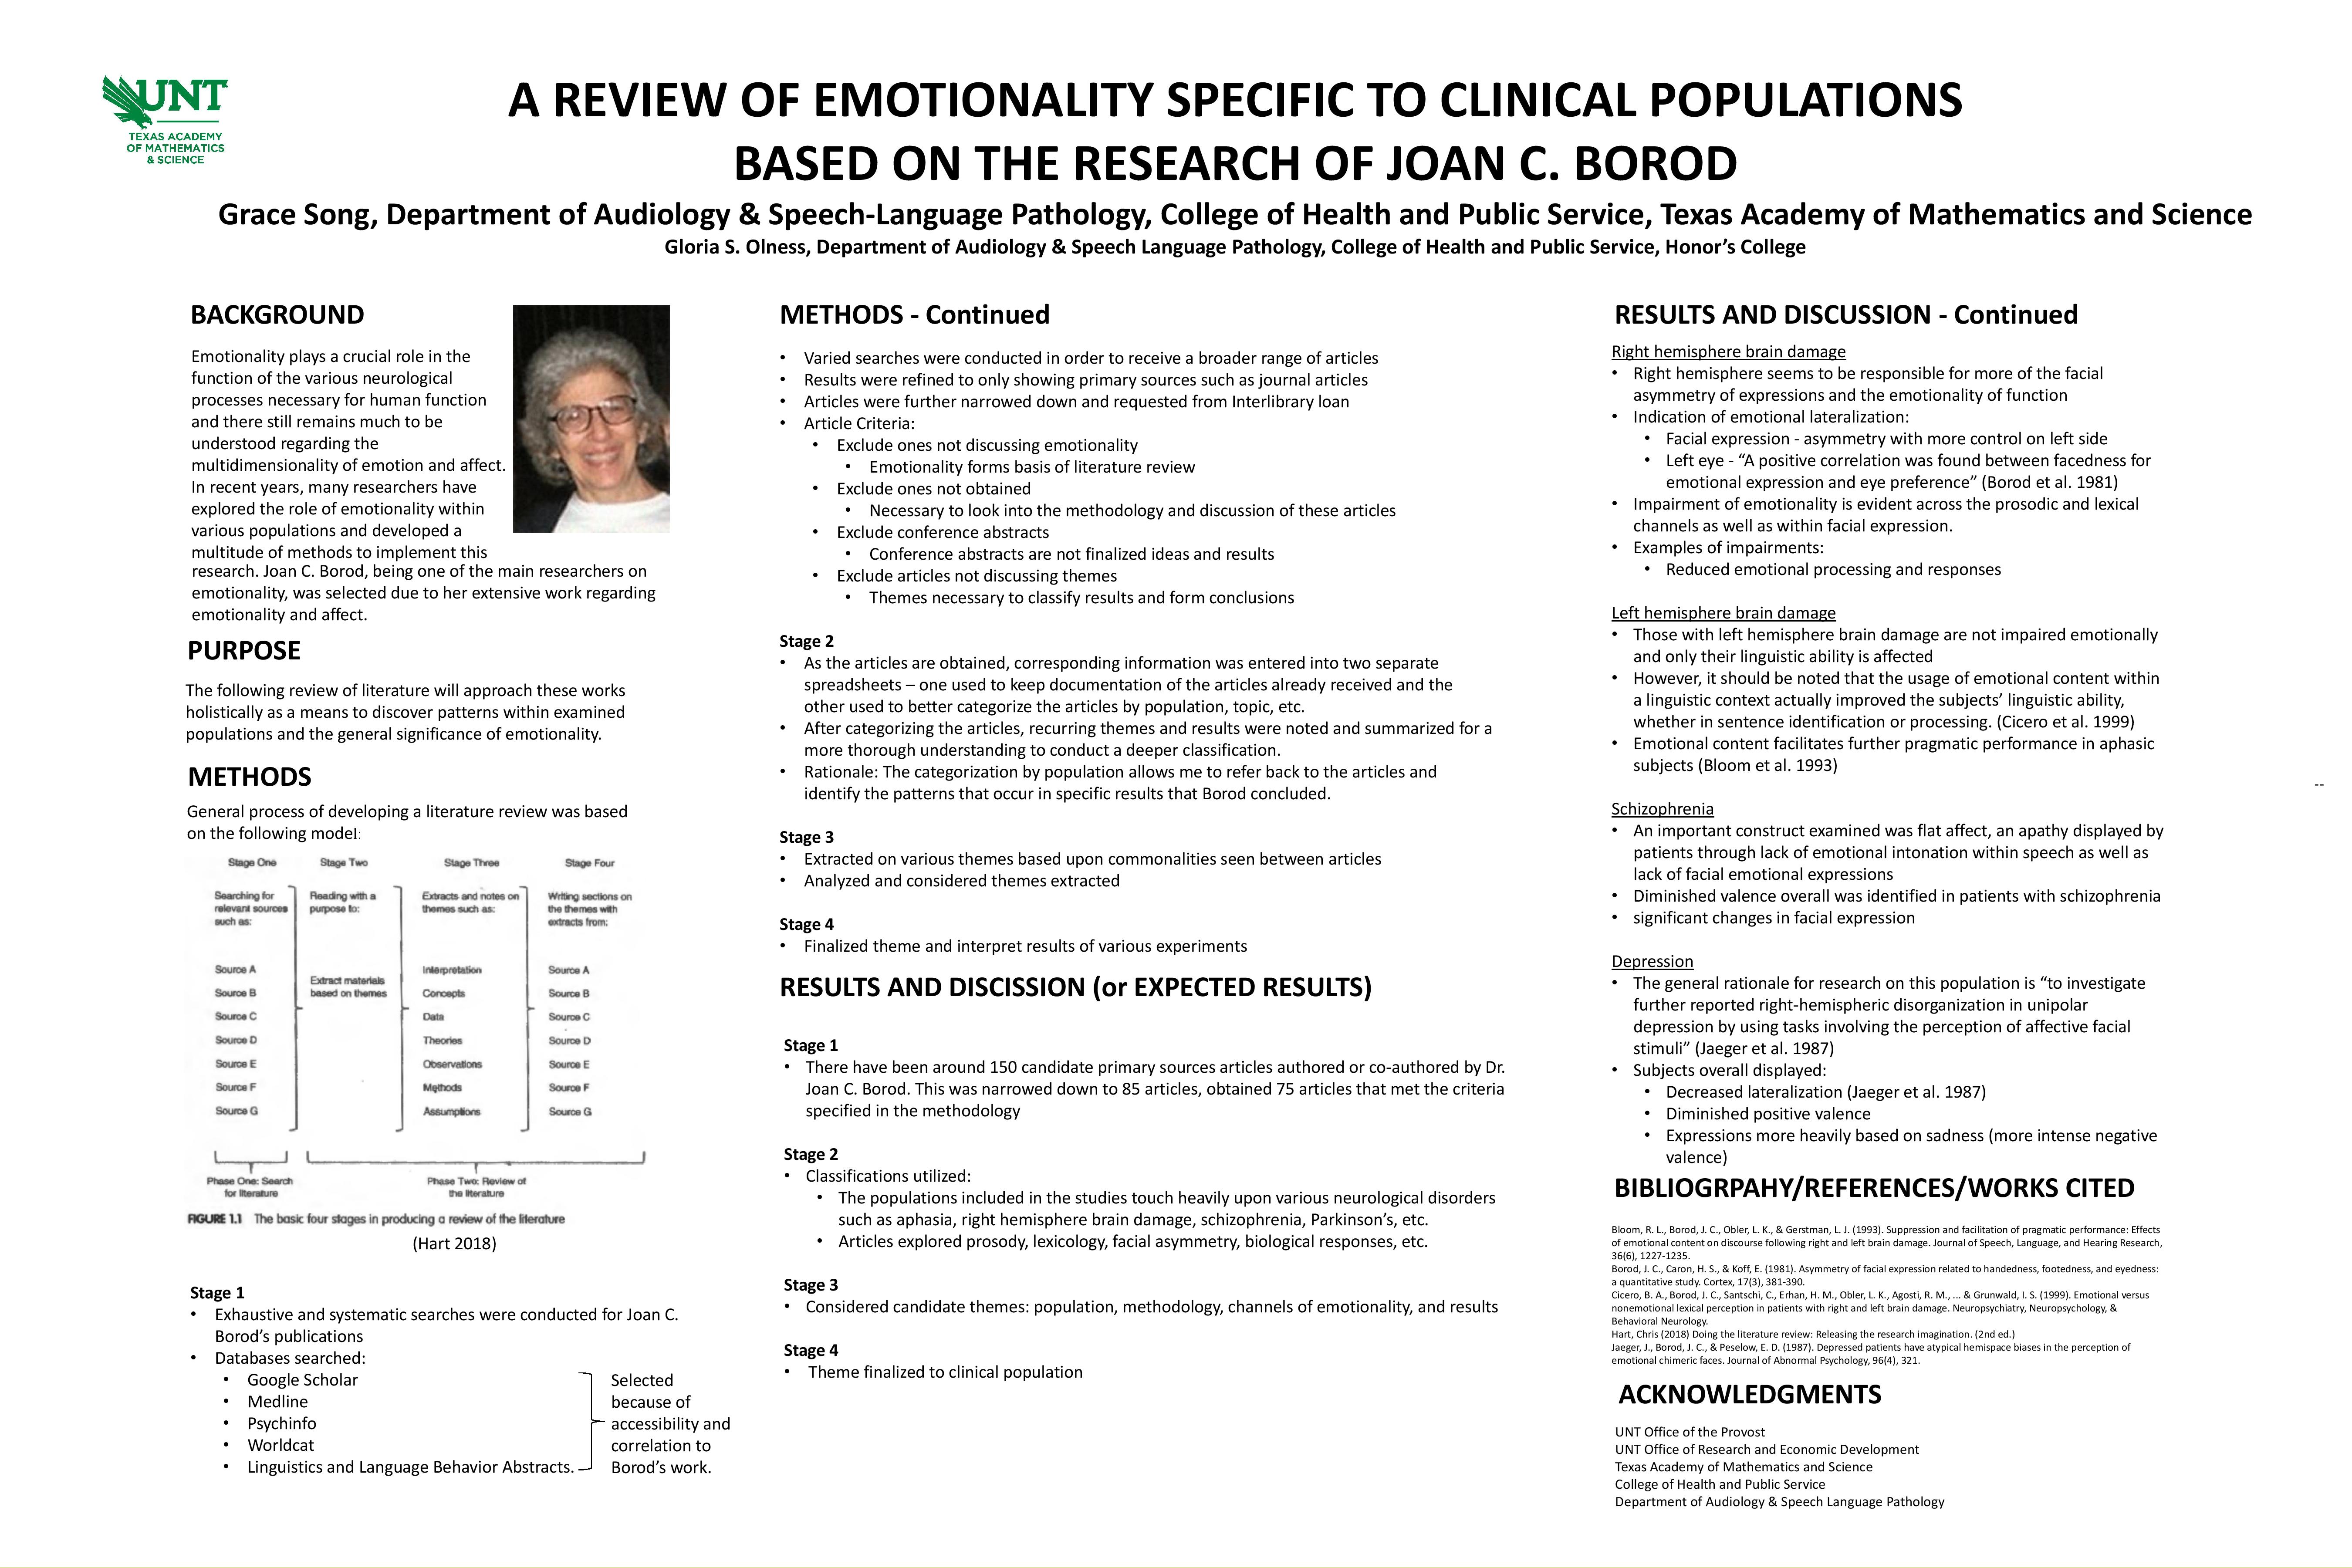 A REVIEW OF EMOTIONALITY SPECIFIC TO CLINICAL POPULATIONS BASED ON THE RESEARCH OF JOAN C. BOROD